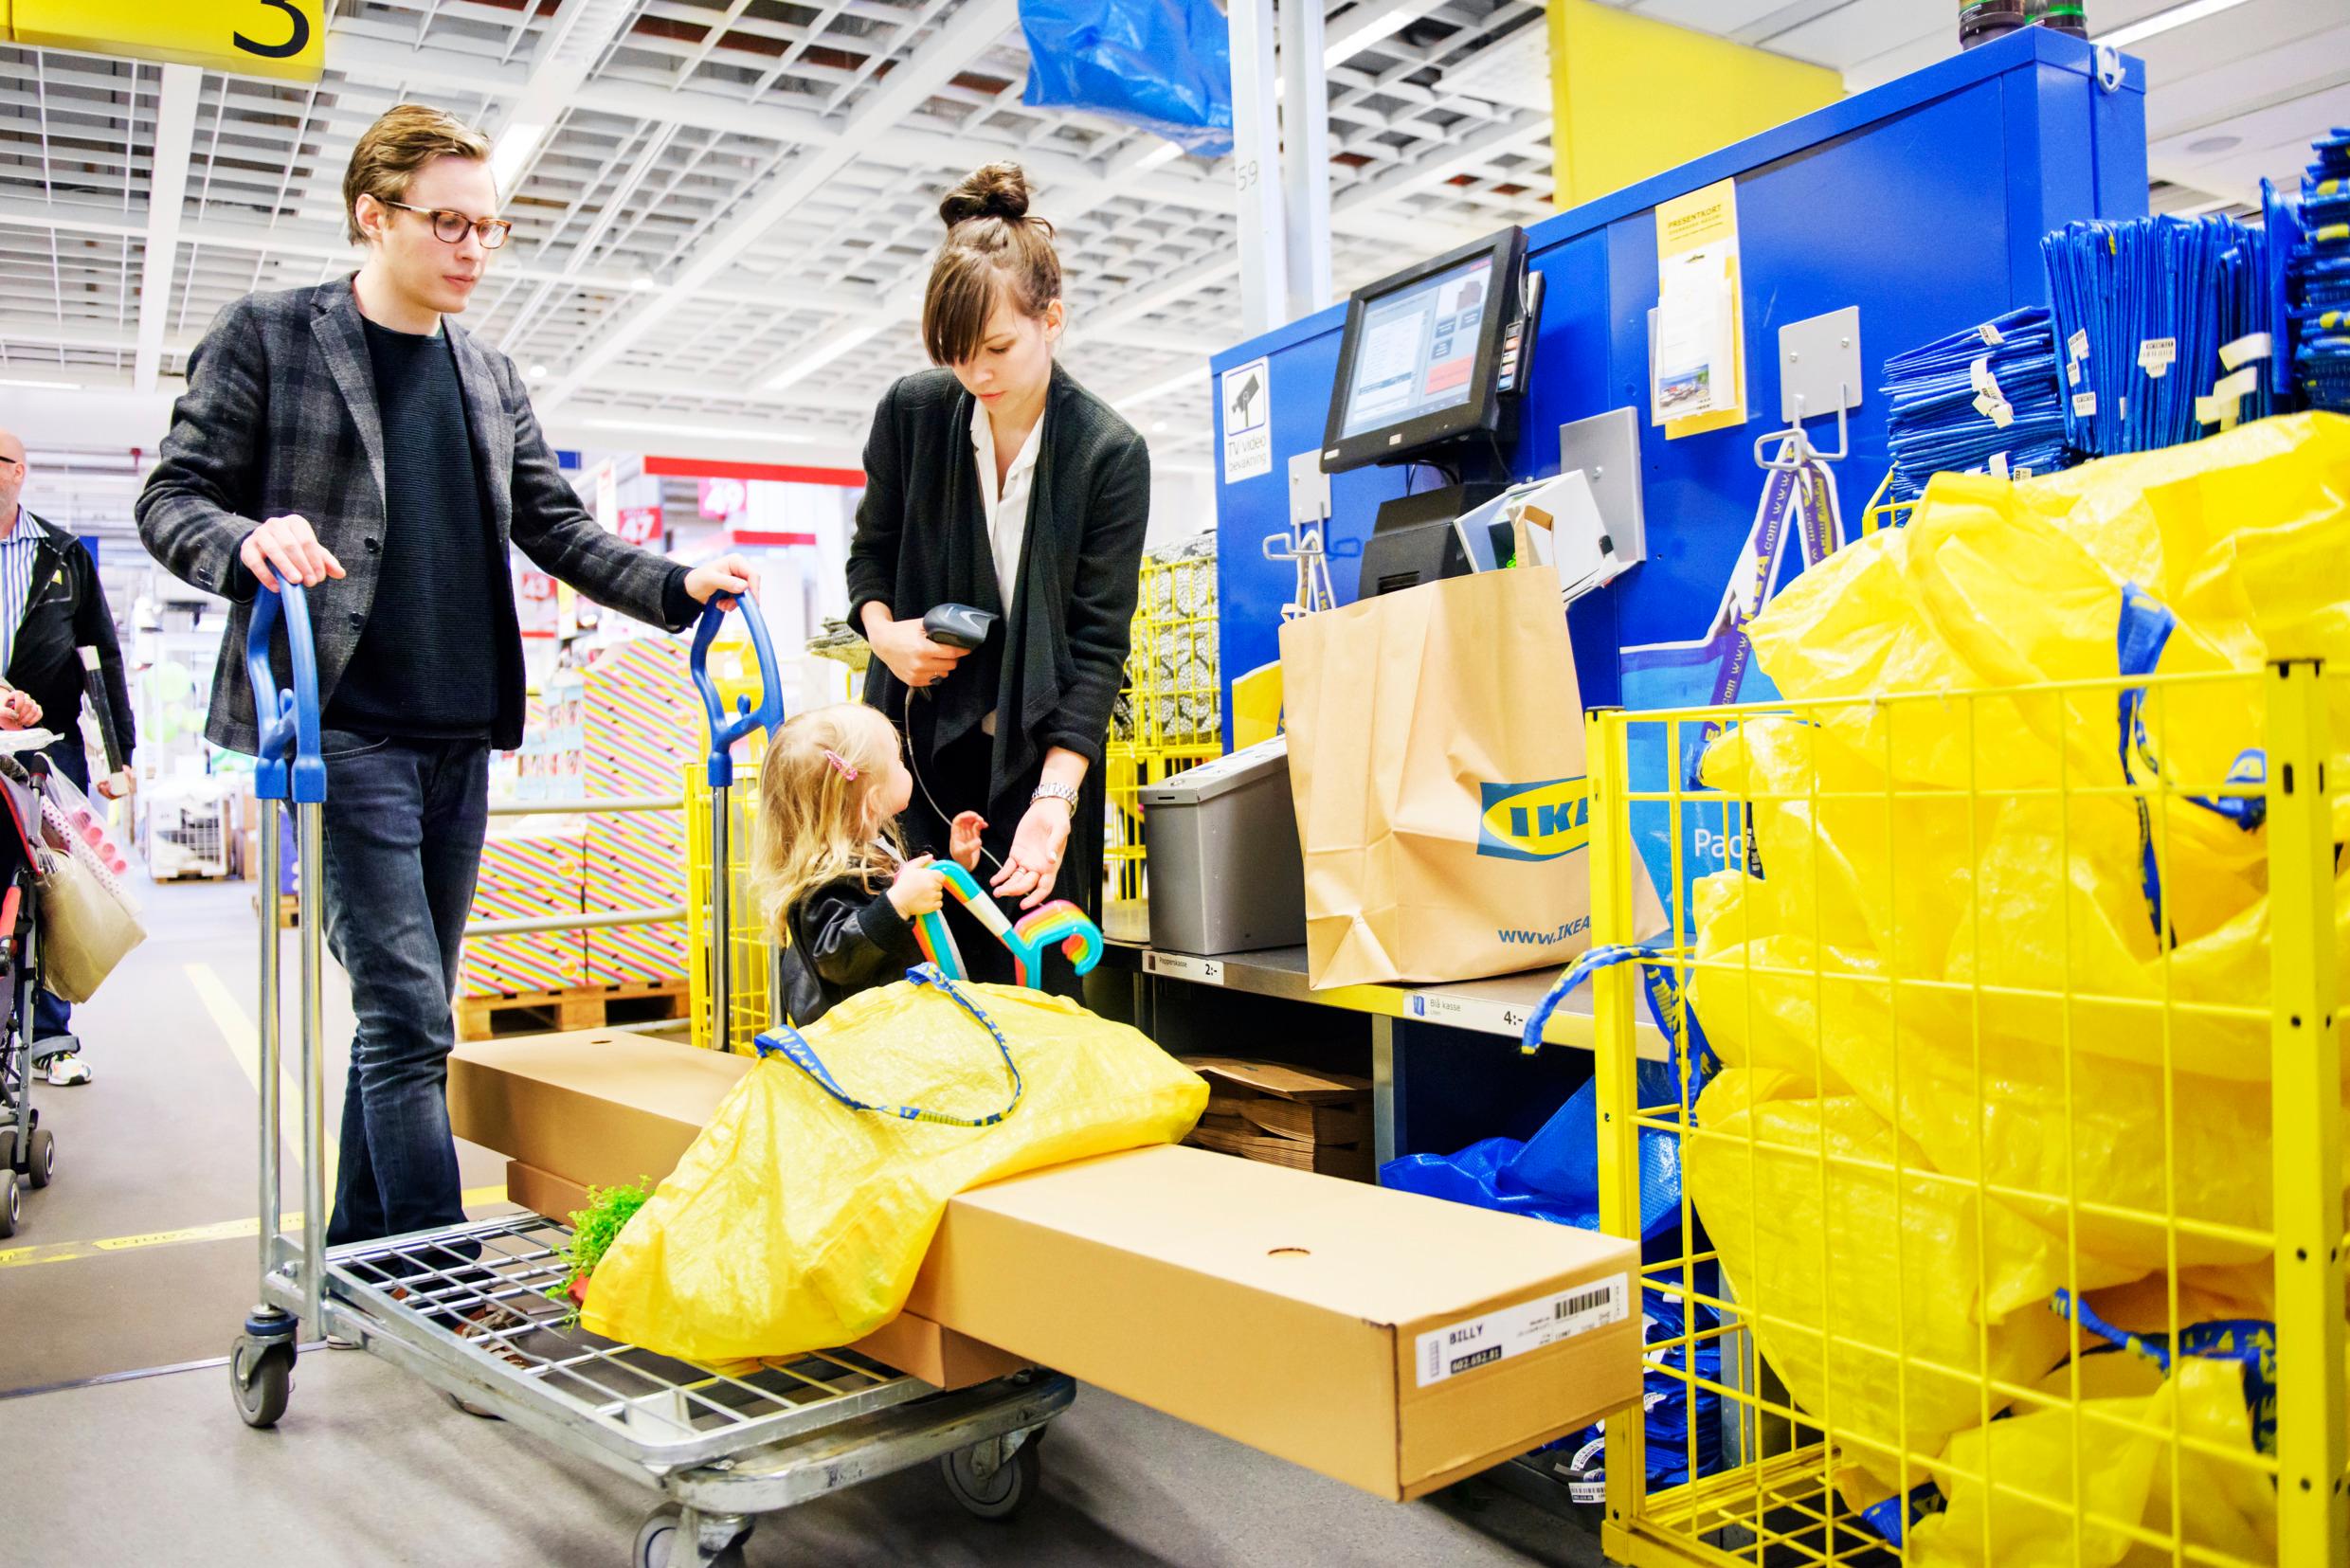 A man and a woman pushing a big cart with a cardboard and a yellow bag on.